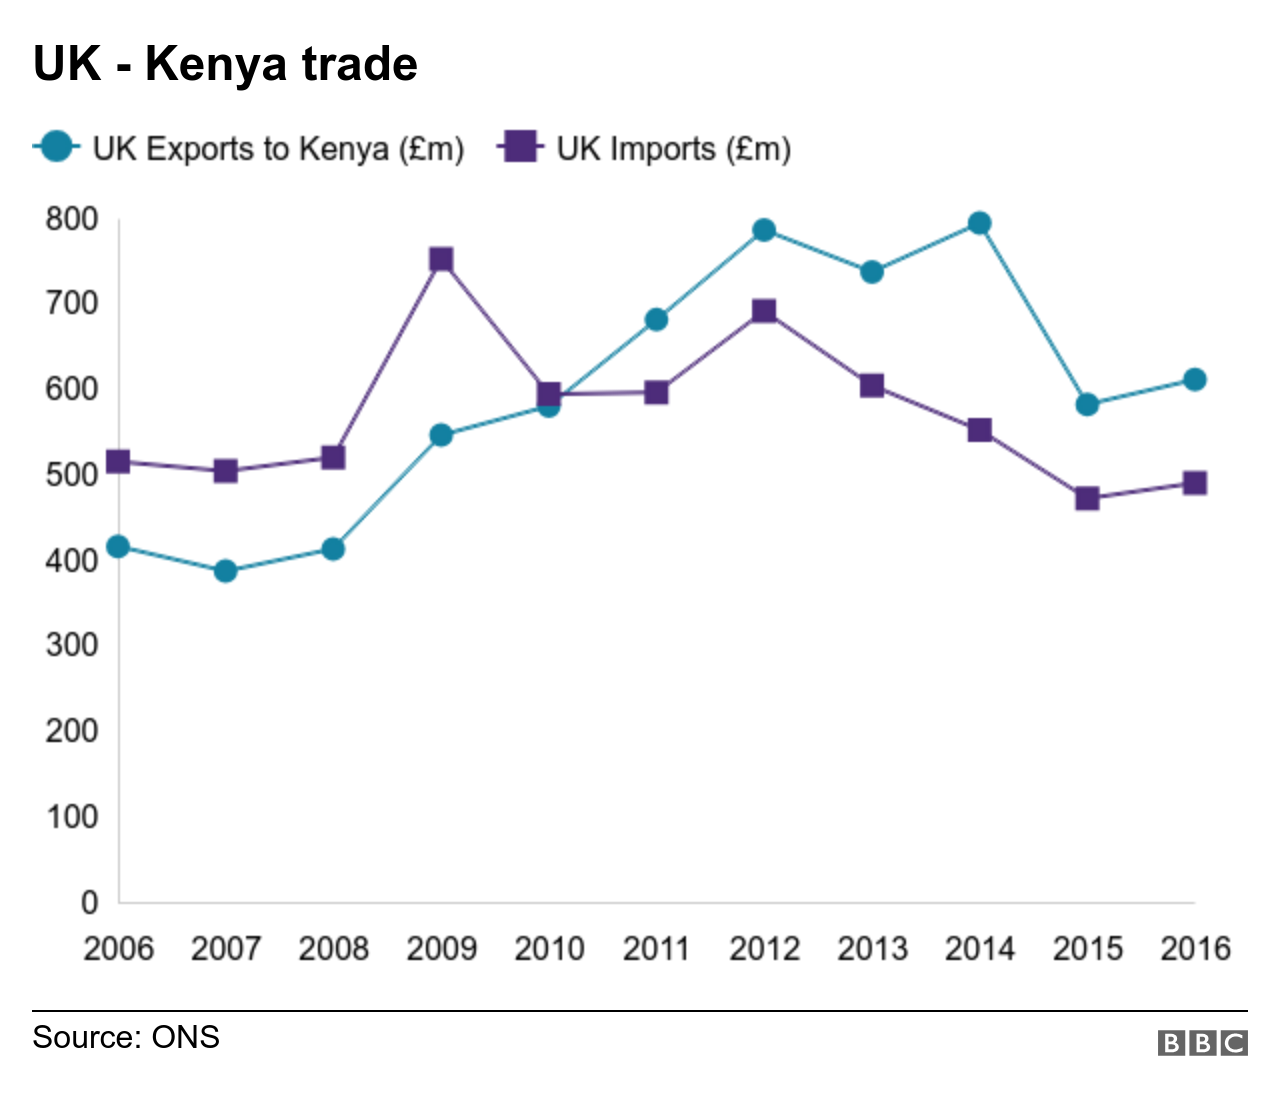 Chart shows imports and exports between Kenya and the UK, the value of which have fallen since 2012.